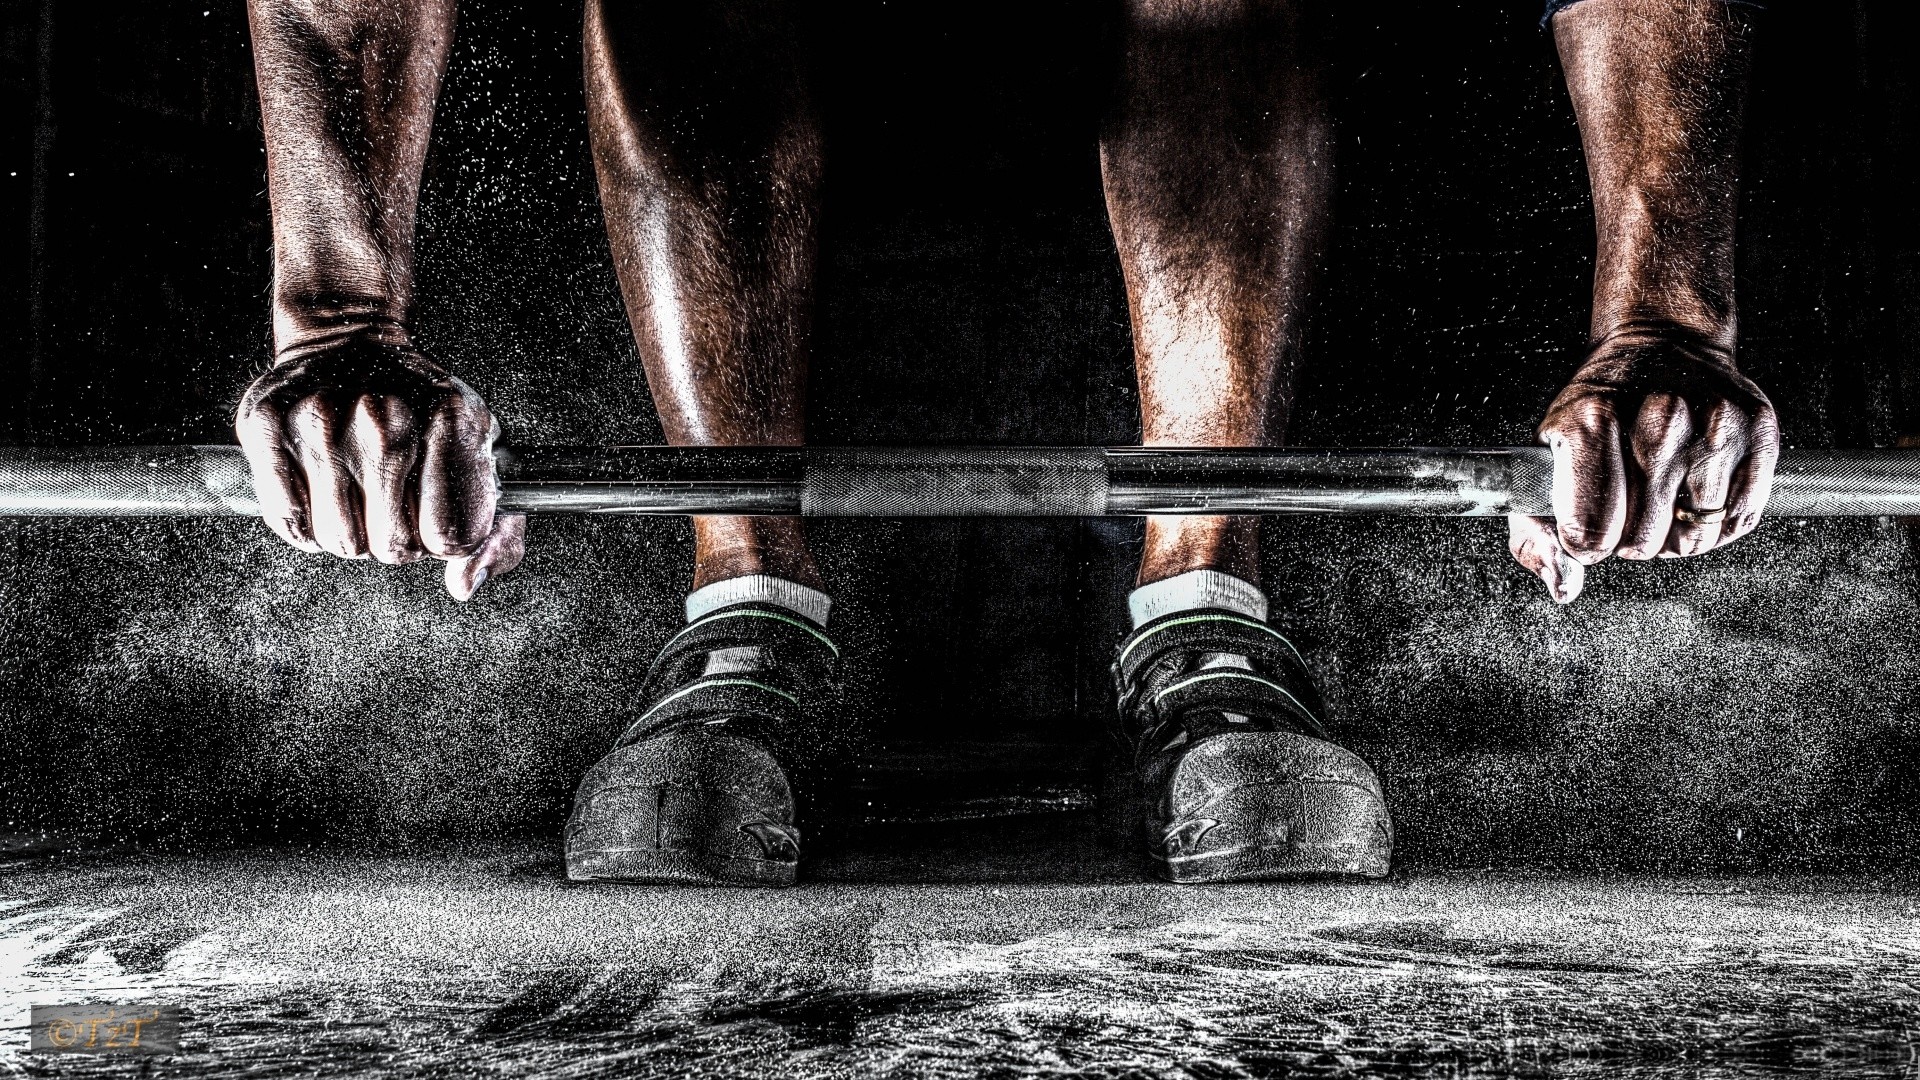 1920x1080 Barbell on the floor, lifting - HD wallpaper download. Wallpapers .